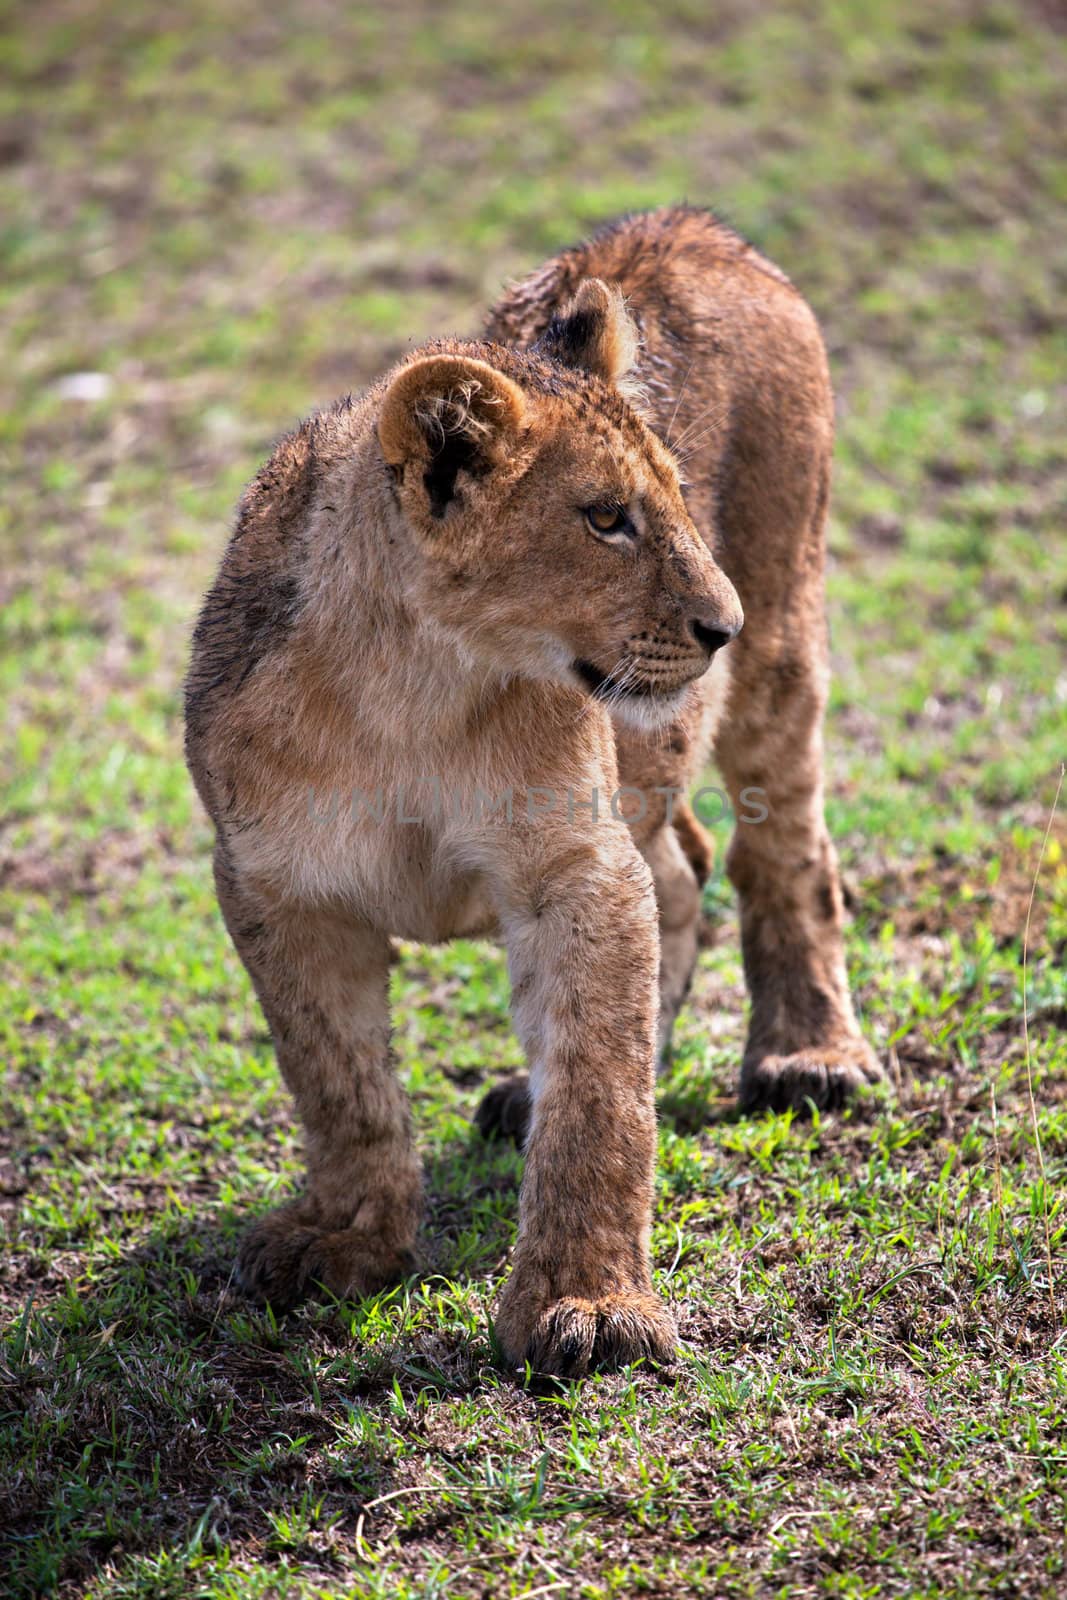 A small lion cub portrait on savannah. Ngorongoro crater in Tanzania, Africa.